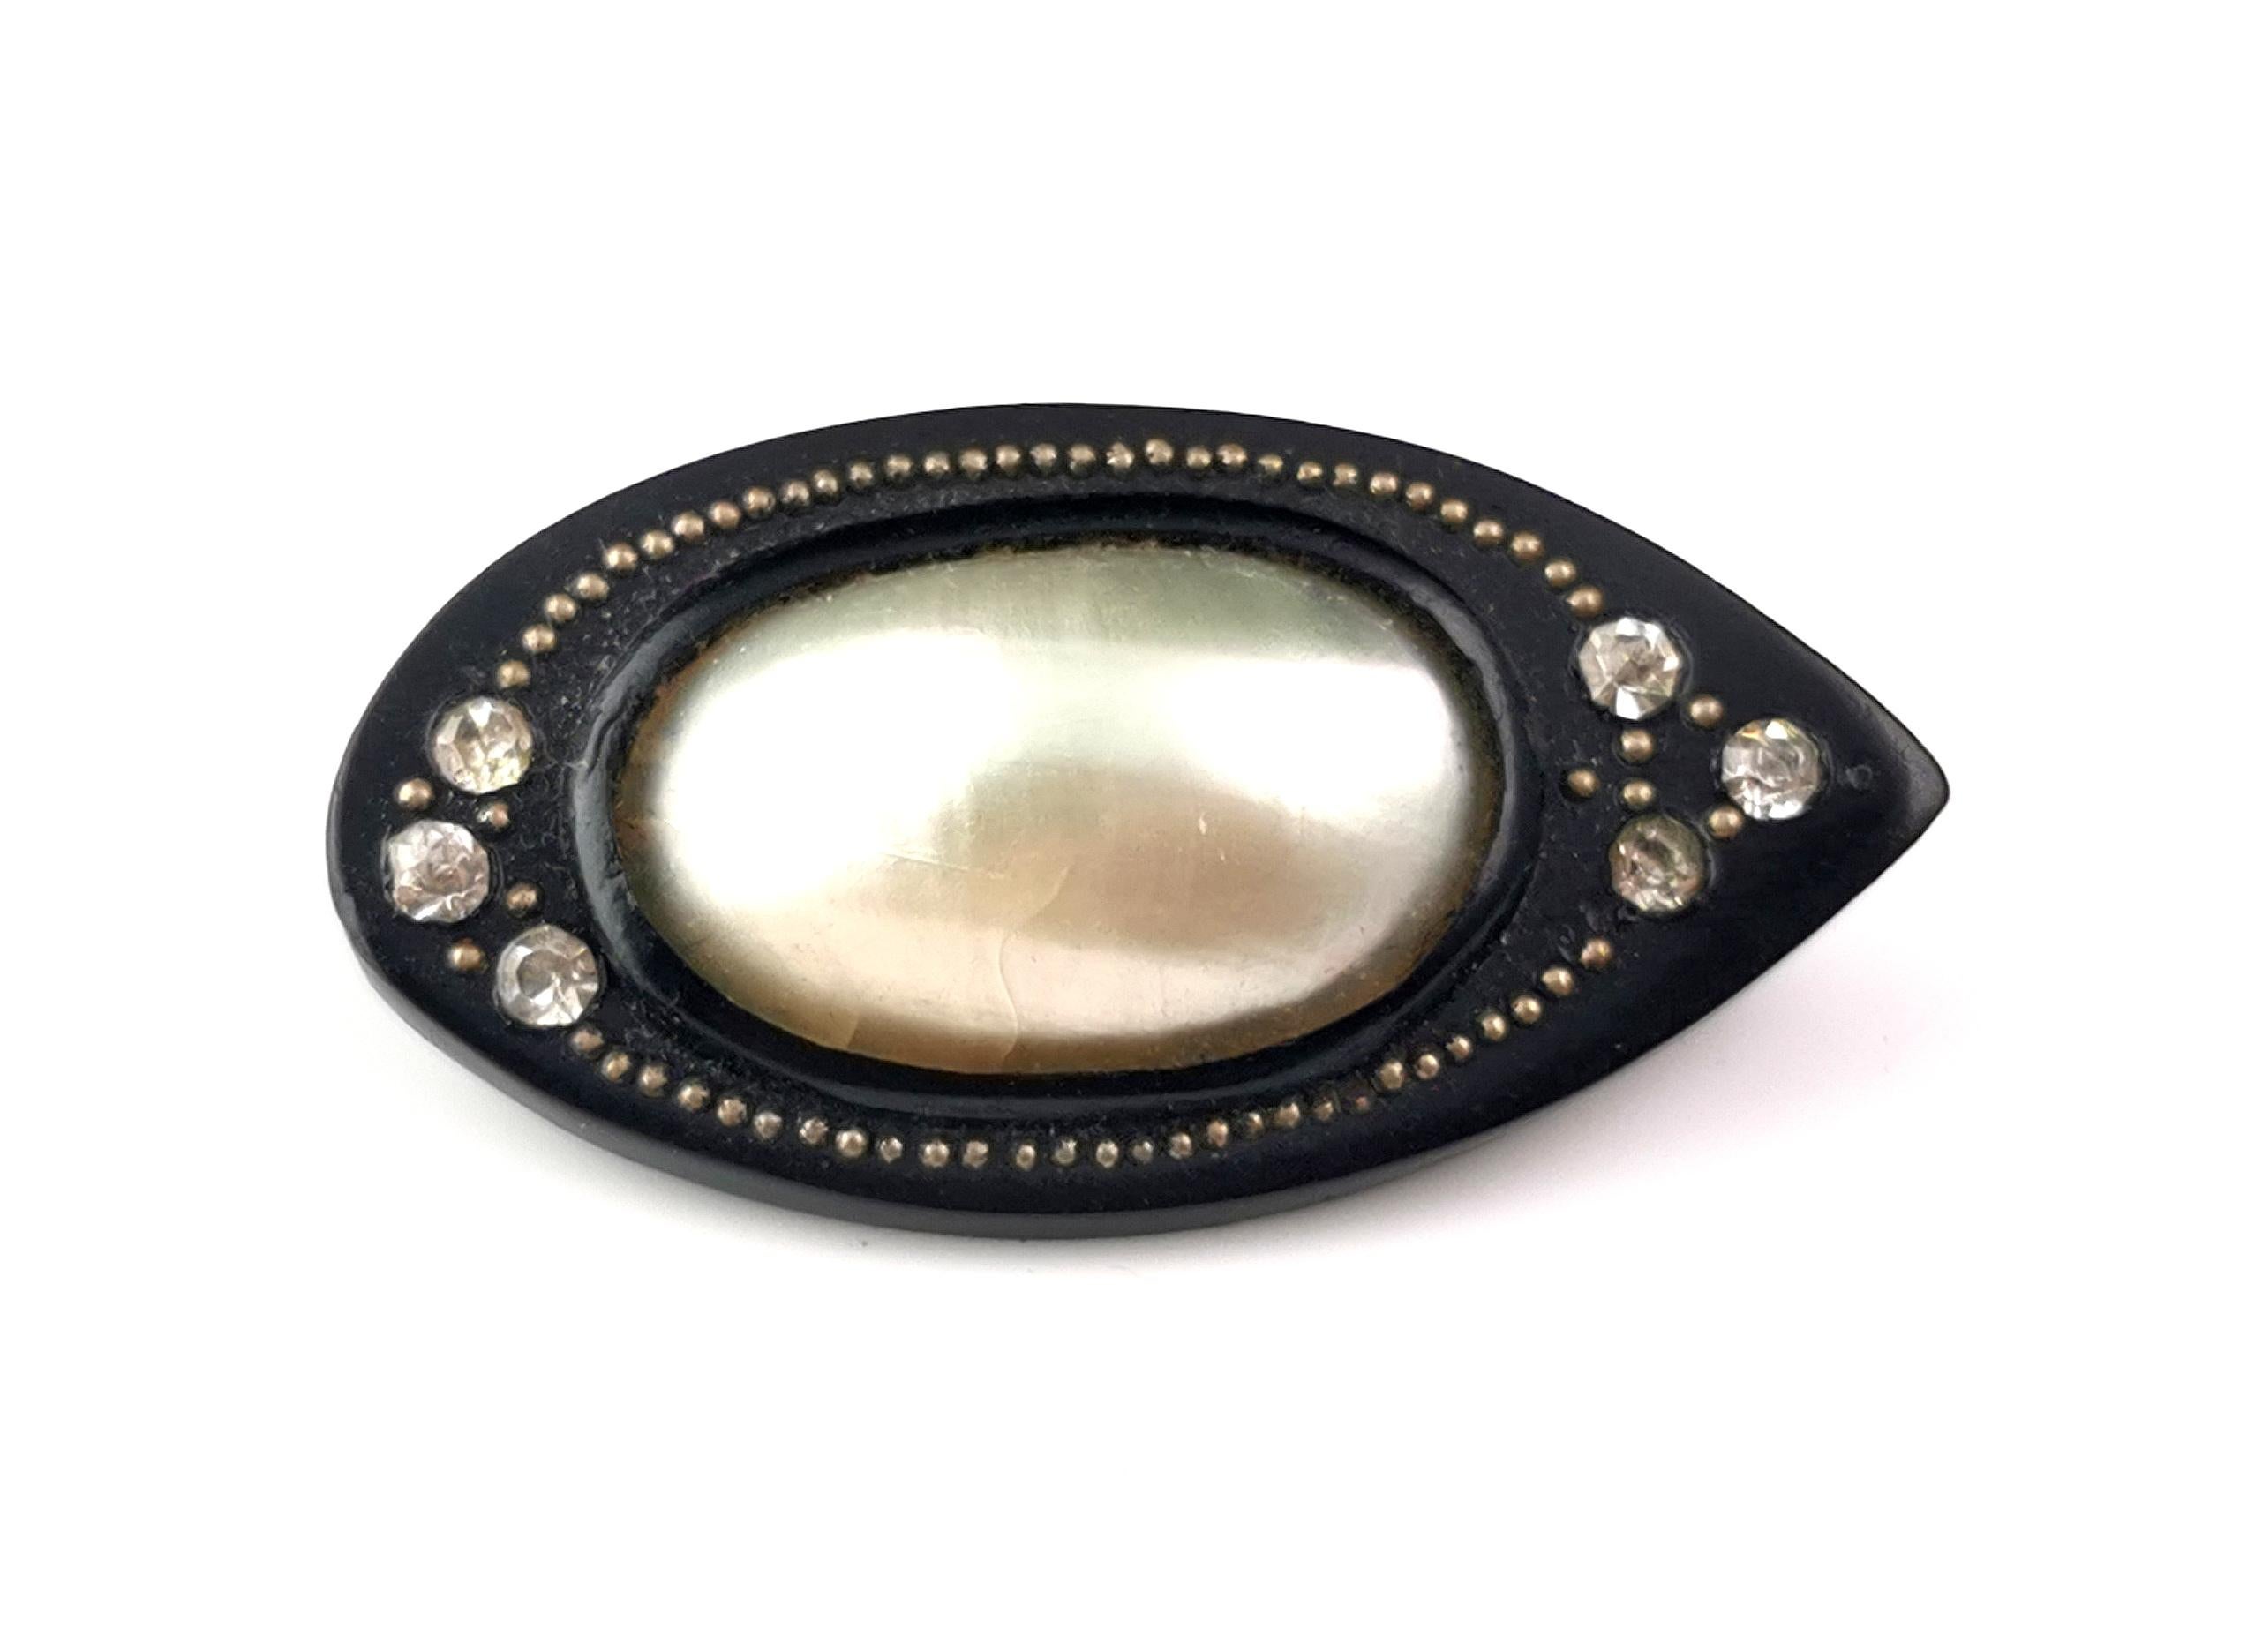 A rare and unusual find is this antique Victorian era Whitby Jet and Coque de Perle eye brooch.

Coque de Perle jewellery was very popular in the Georgian era, a faux pearl, usually large in size, created using Indian nautilus shells or pearly